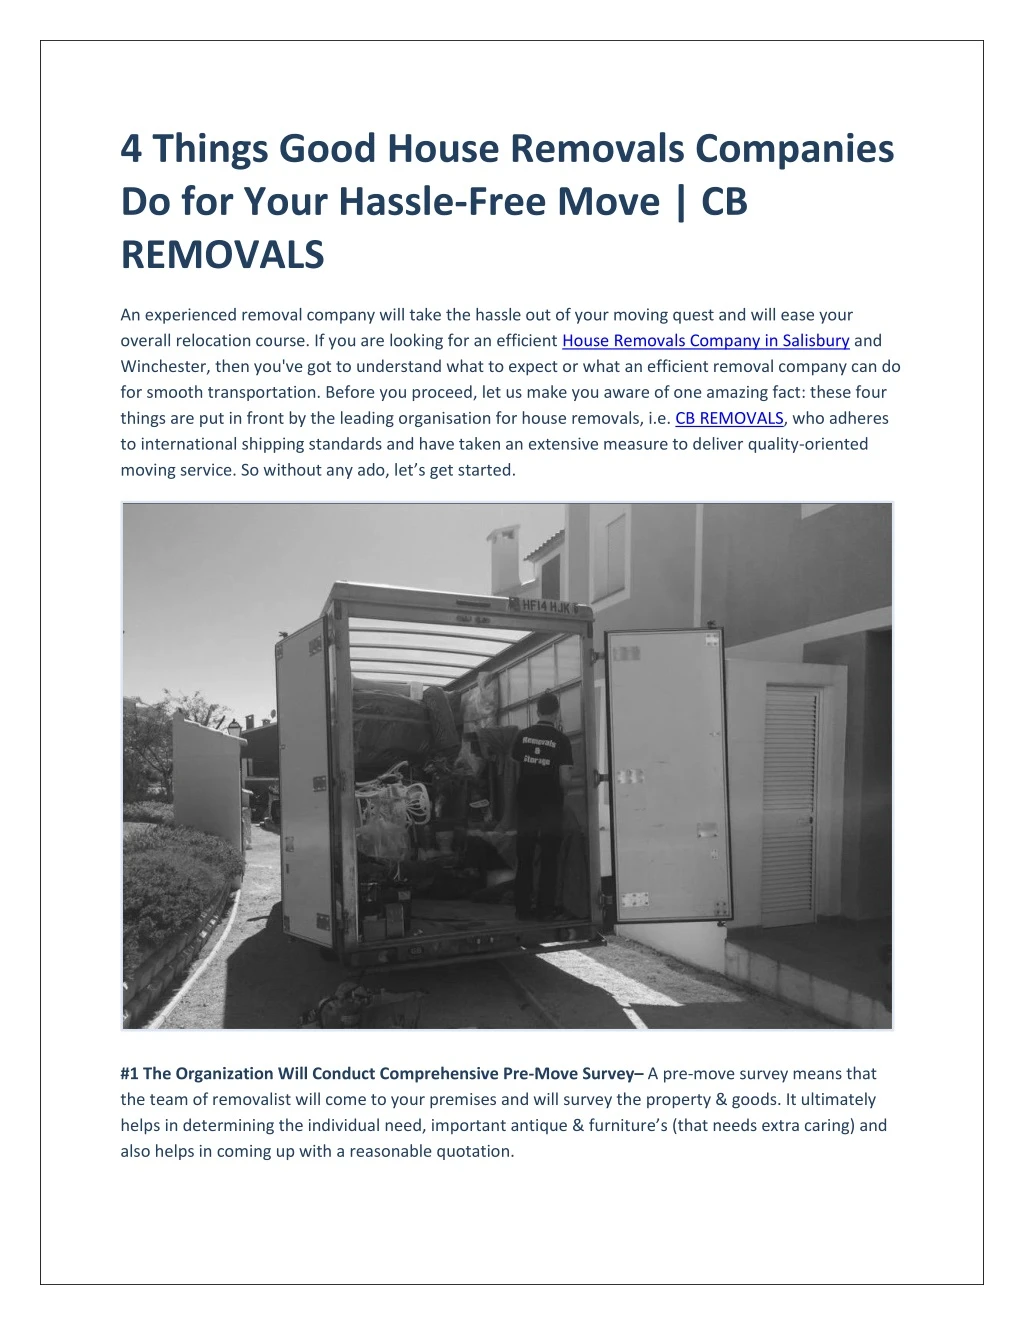 4 things good house removals companies